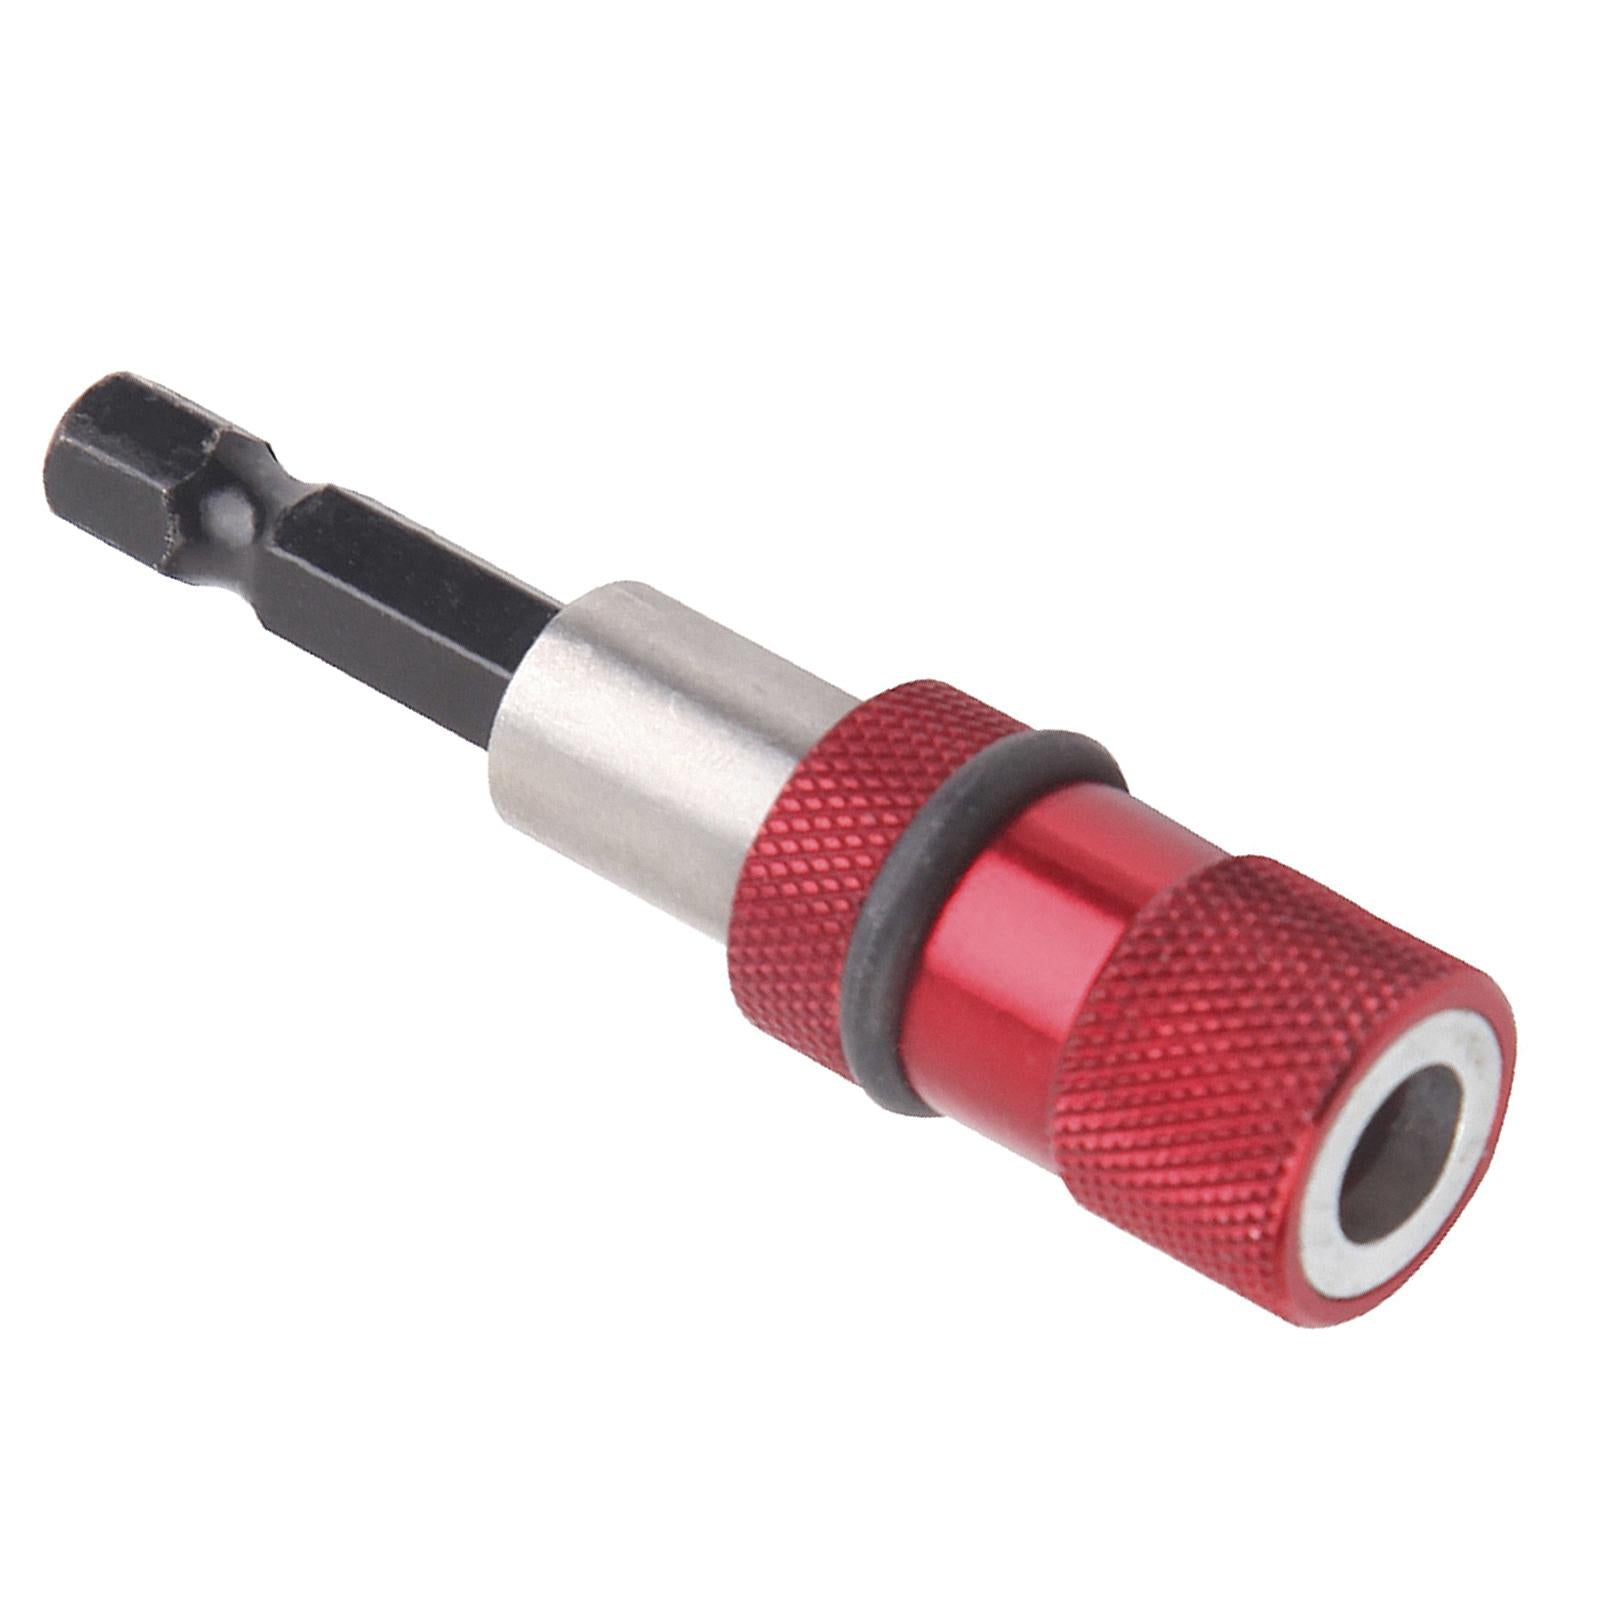 Magnetic Drywall Screw Bit Holder 1/4 Hex Shank Drill Screw Tool Red